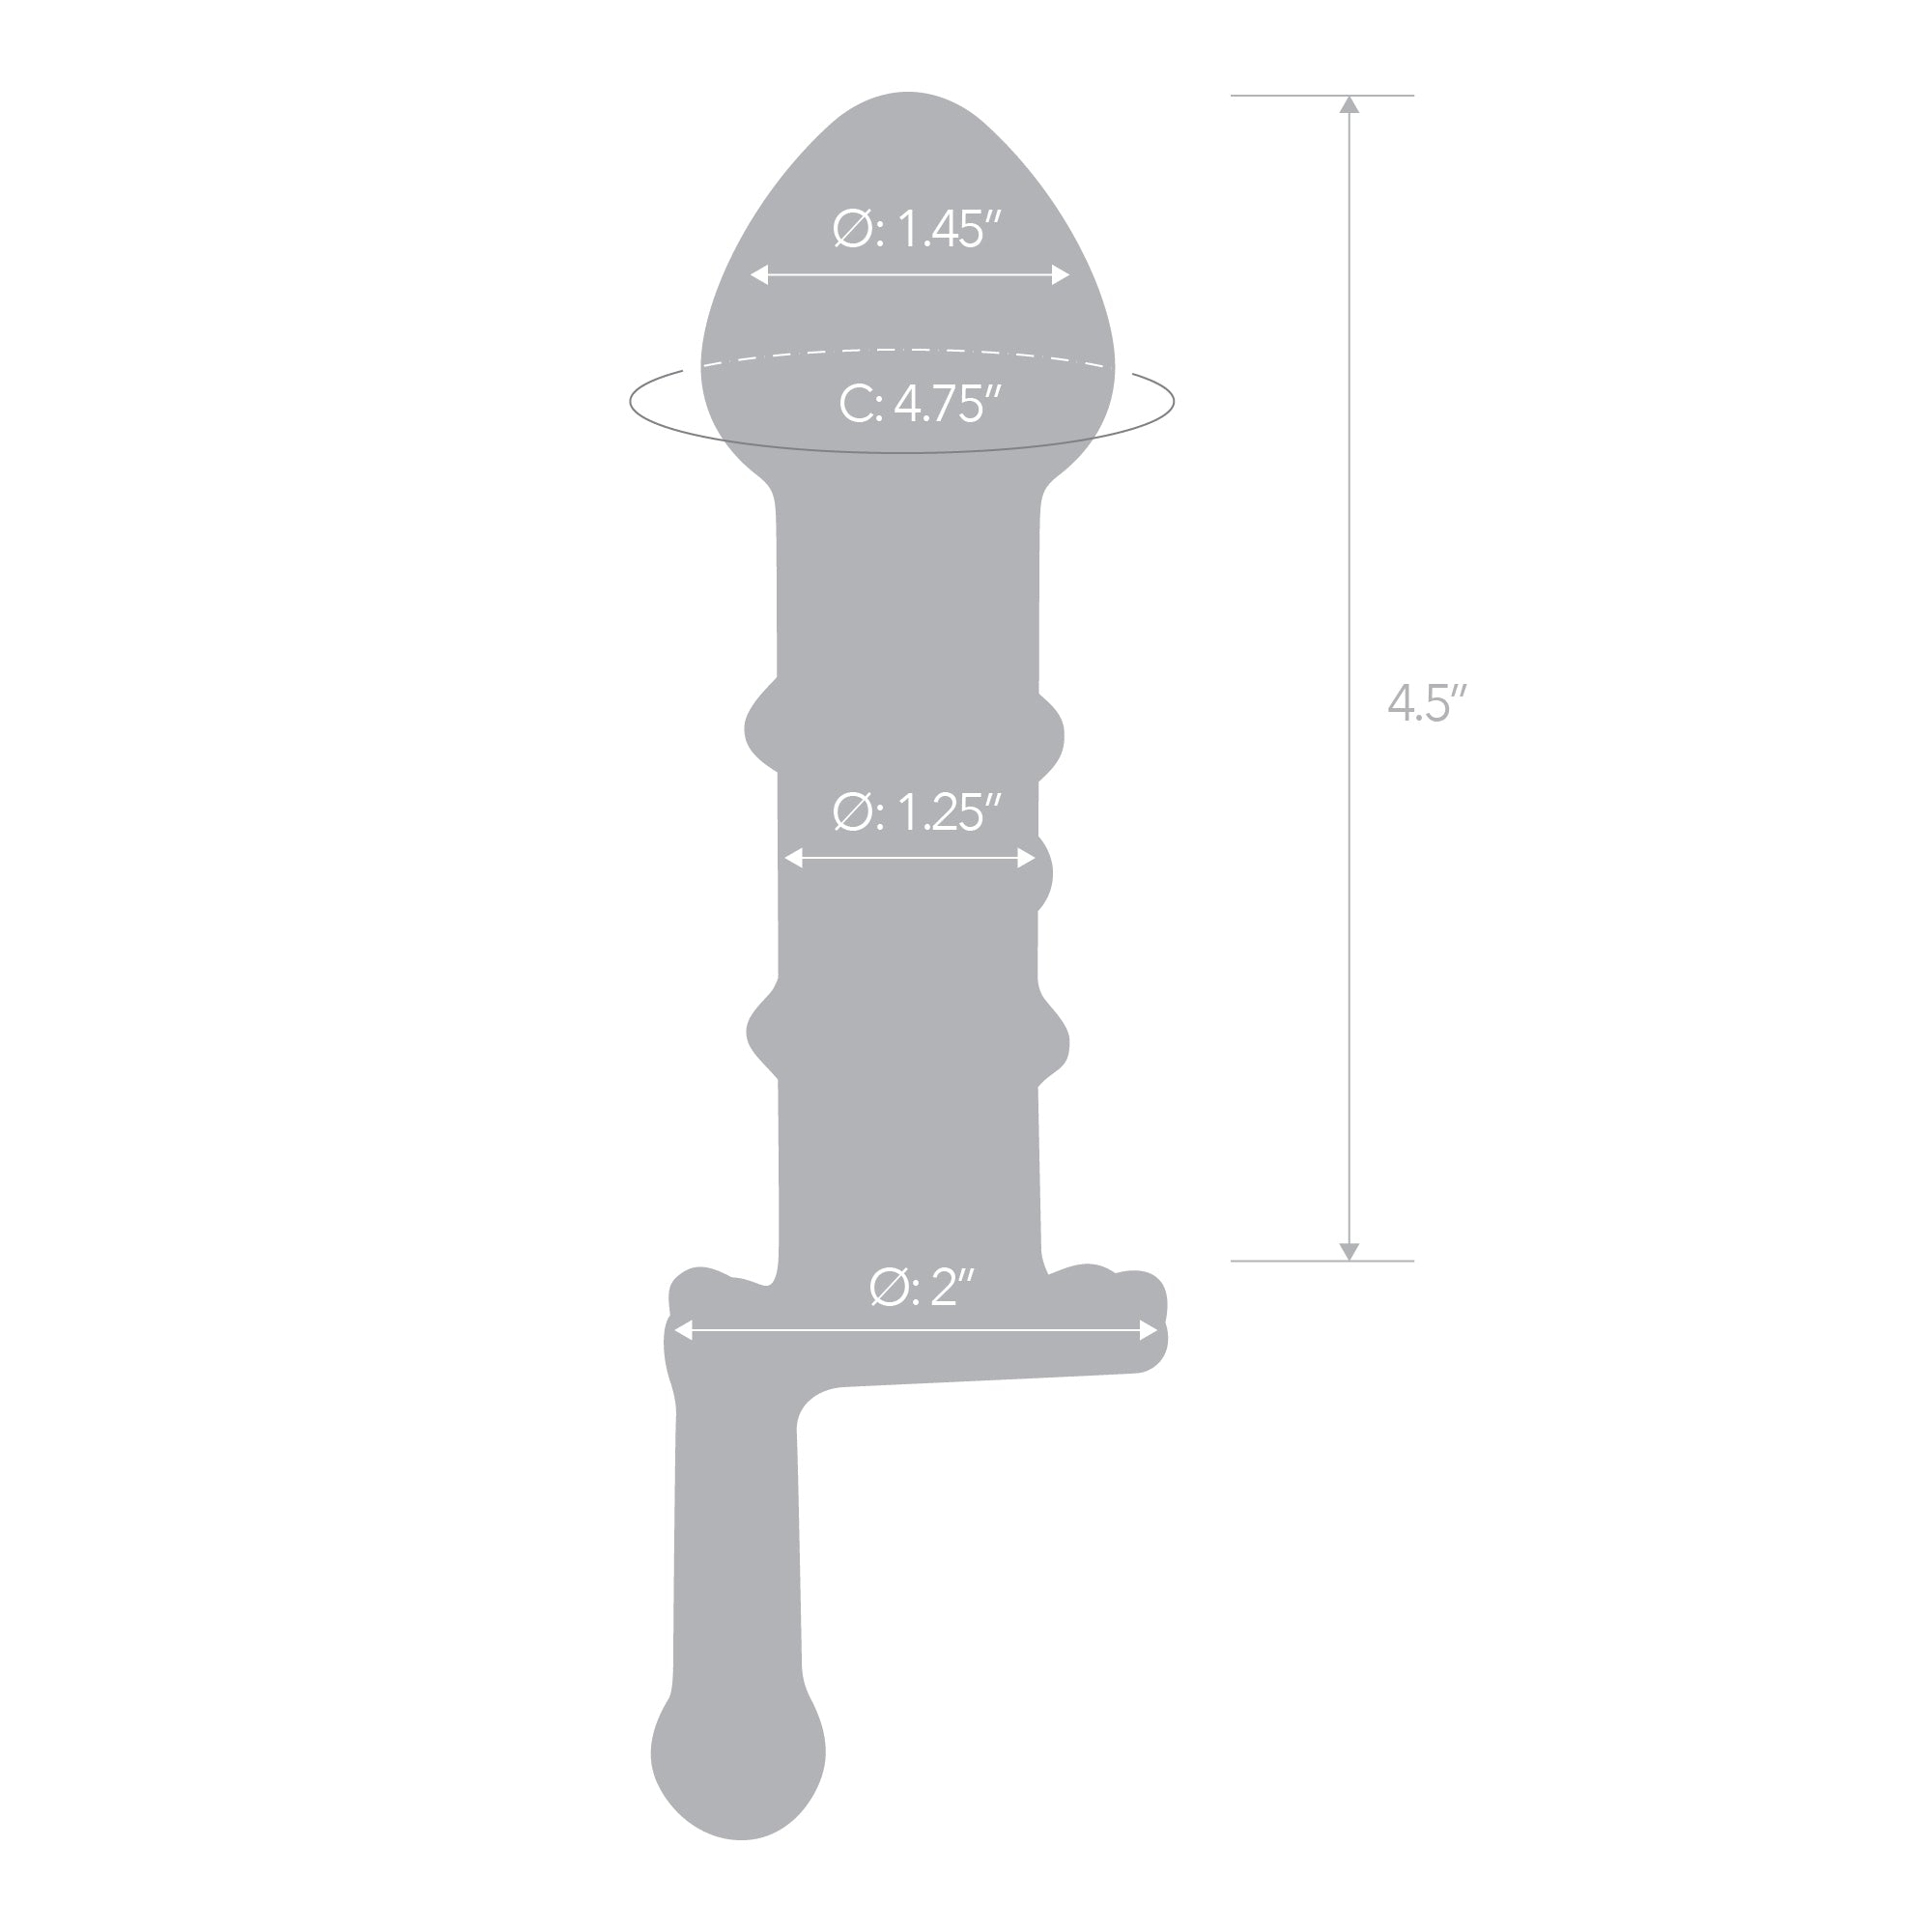 Specifications of the Gläs Candy Land Juicer Glass Anal Toy